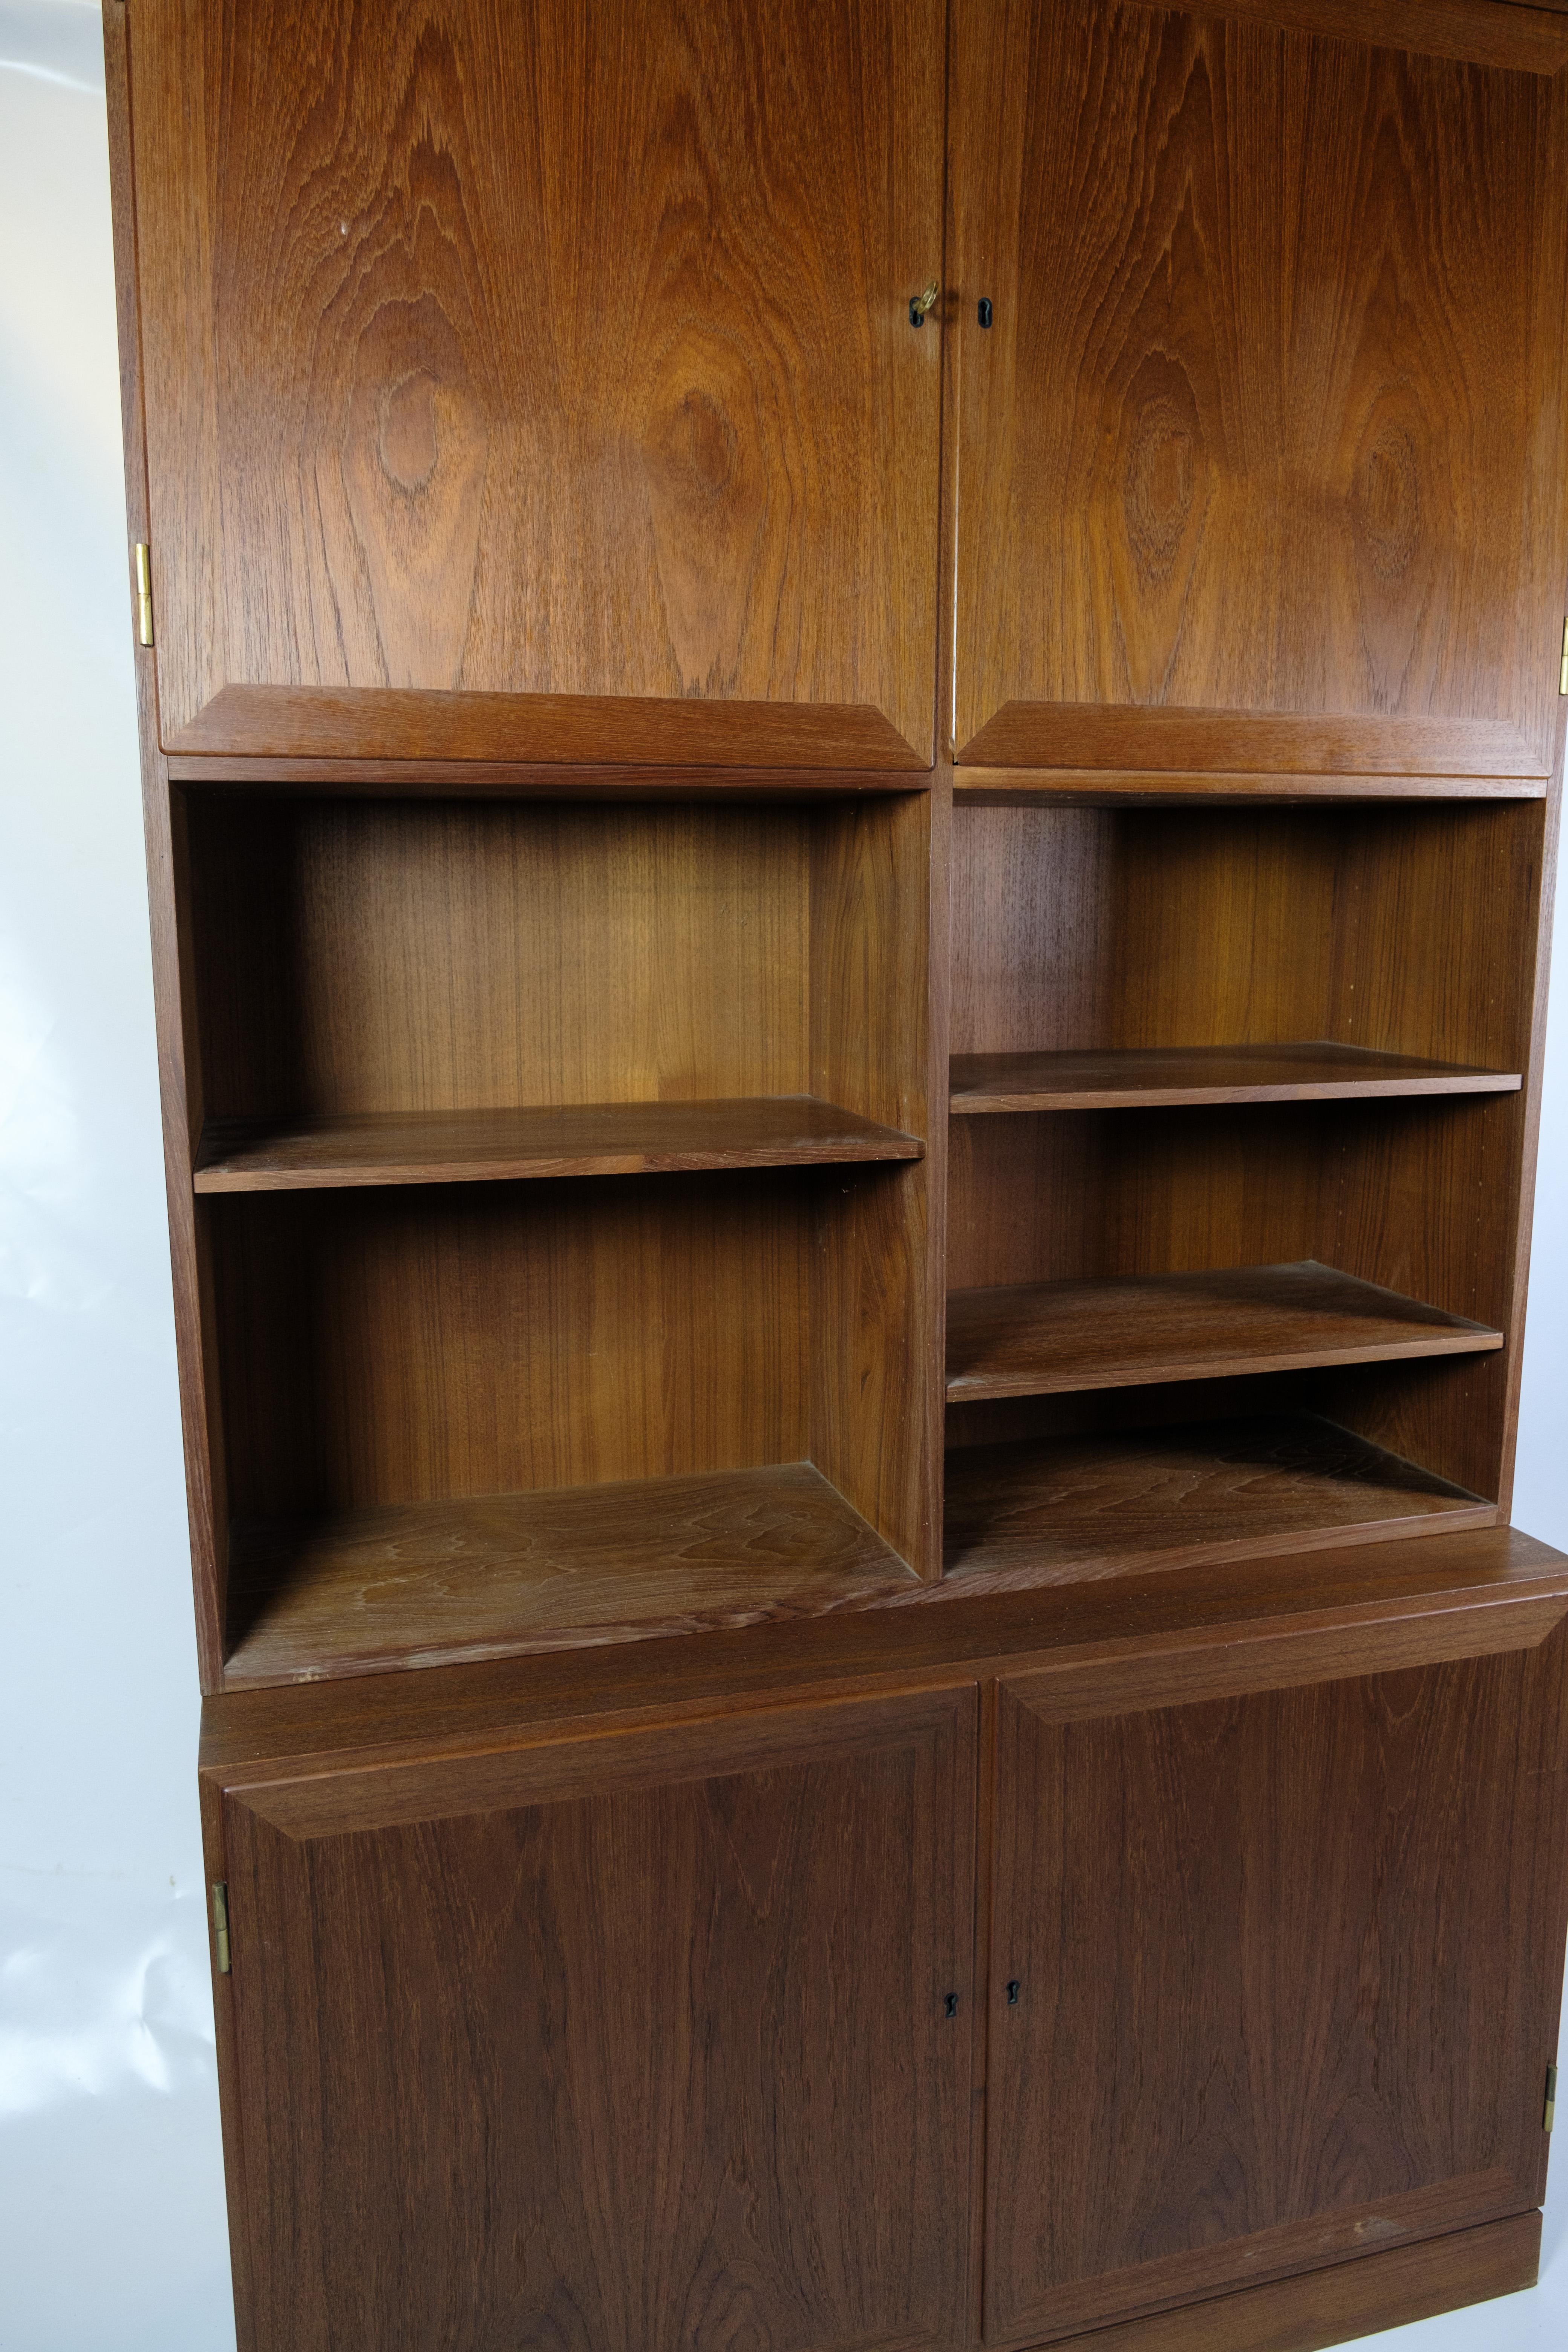 This bookcase made of teak from the 1960s is a fantastic example of Danish furniture art. With its extensive storage capacity and beautiful design, this bookcase exudes both functionality and aesthetics.

In the middle of the bookcase are open